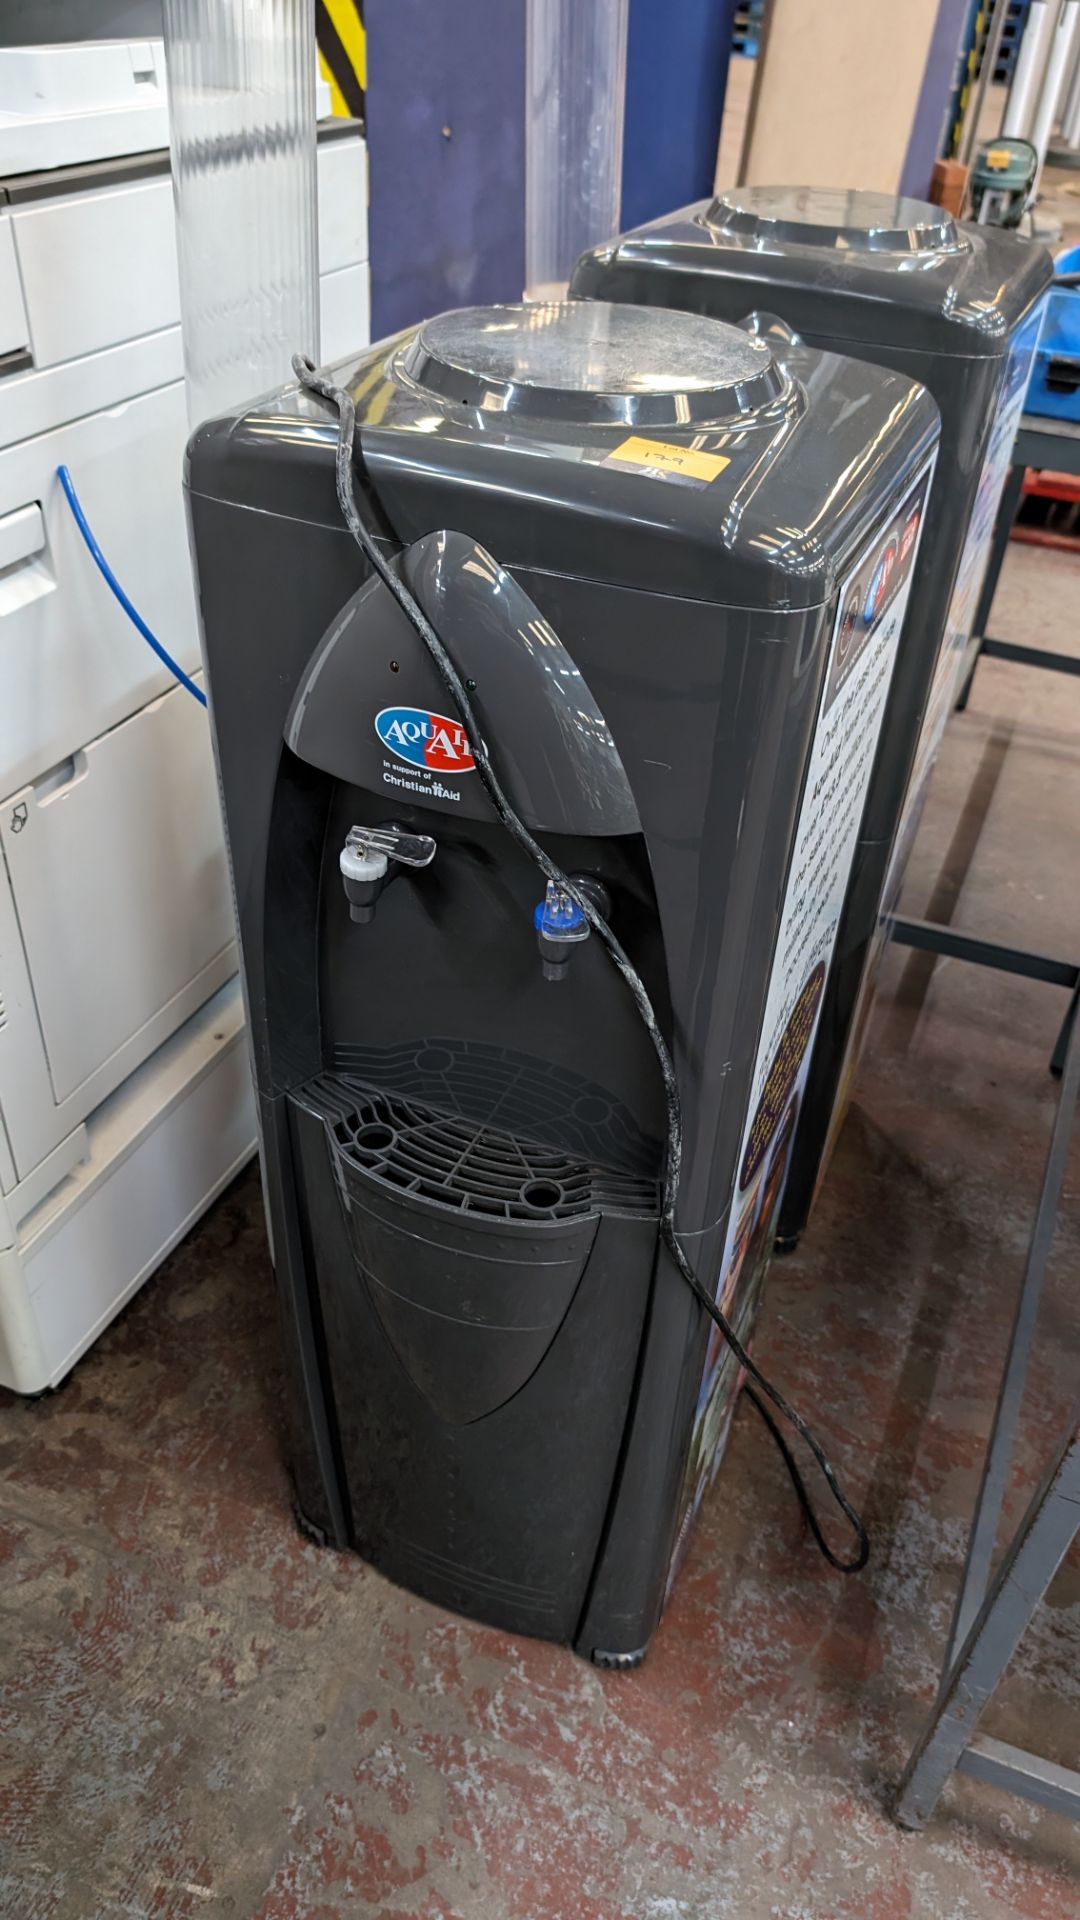 2 off floor standing water coolers, for connection to the water mains supply - Image 2 of 7